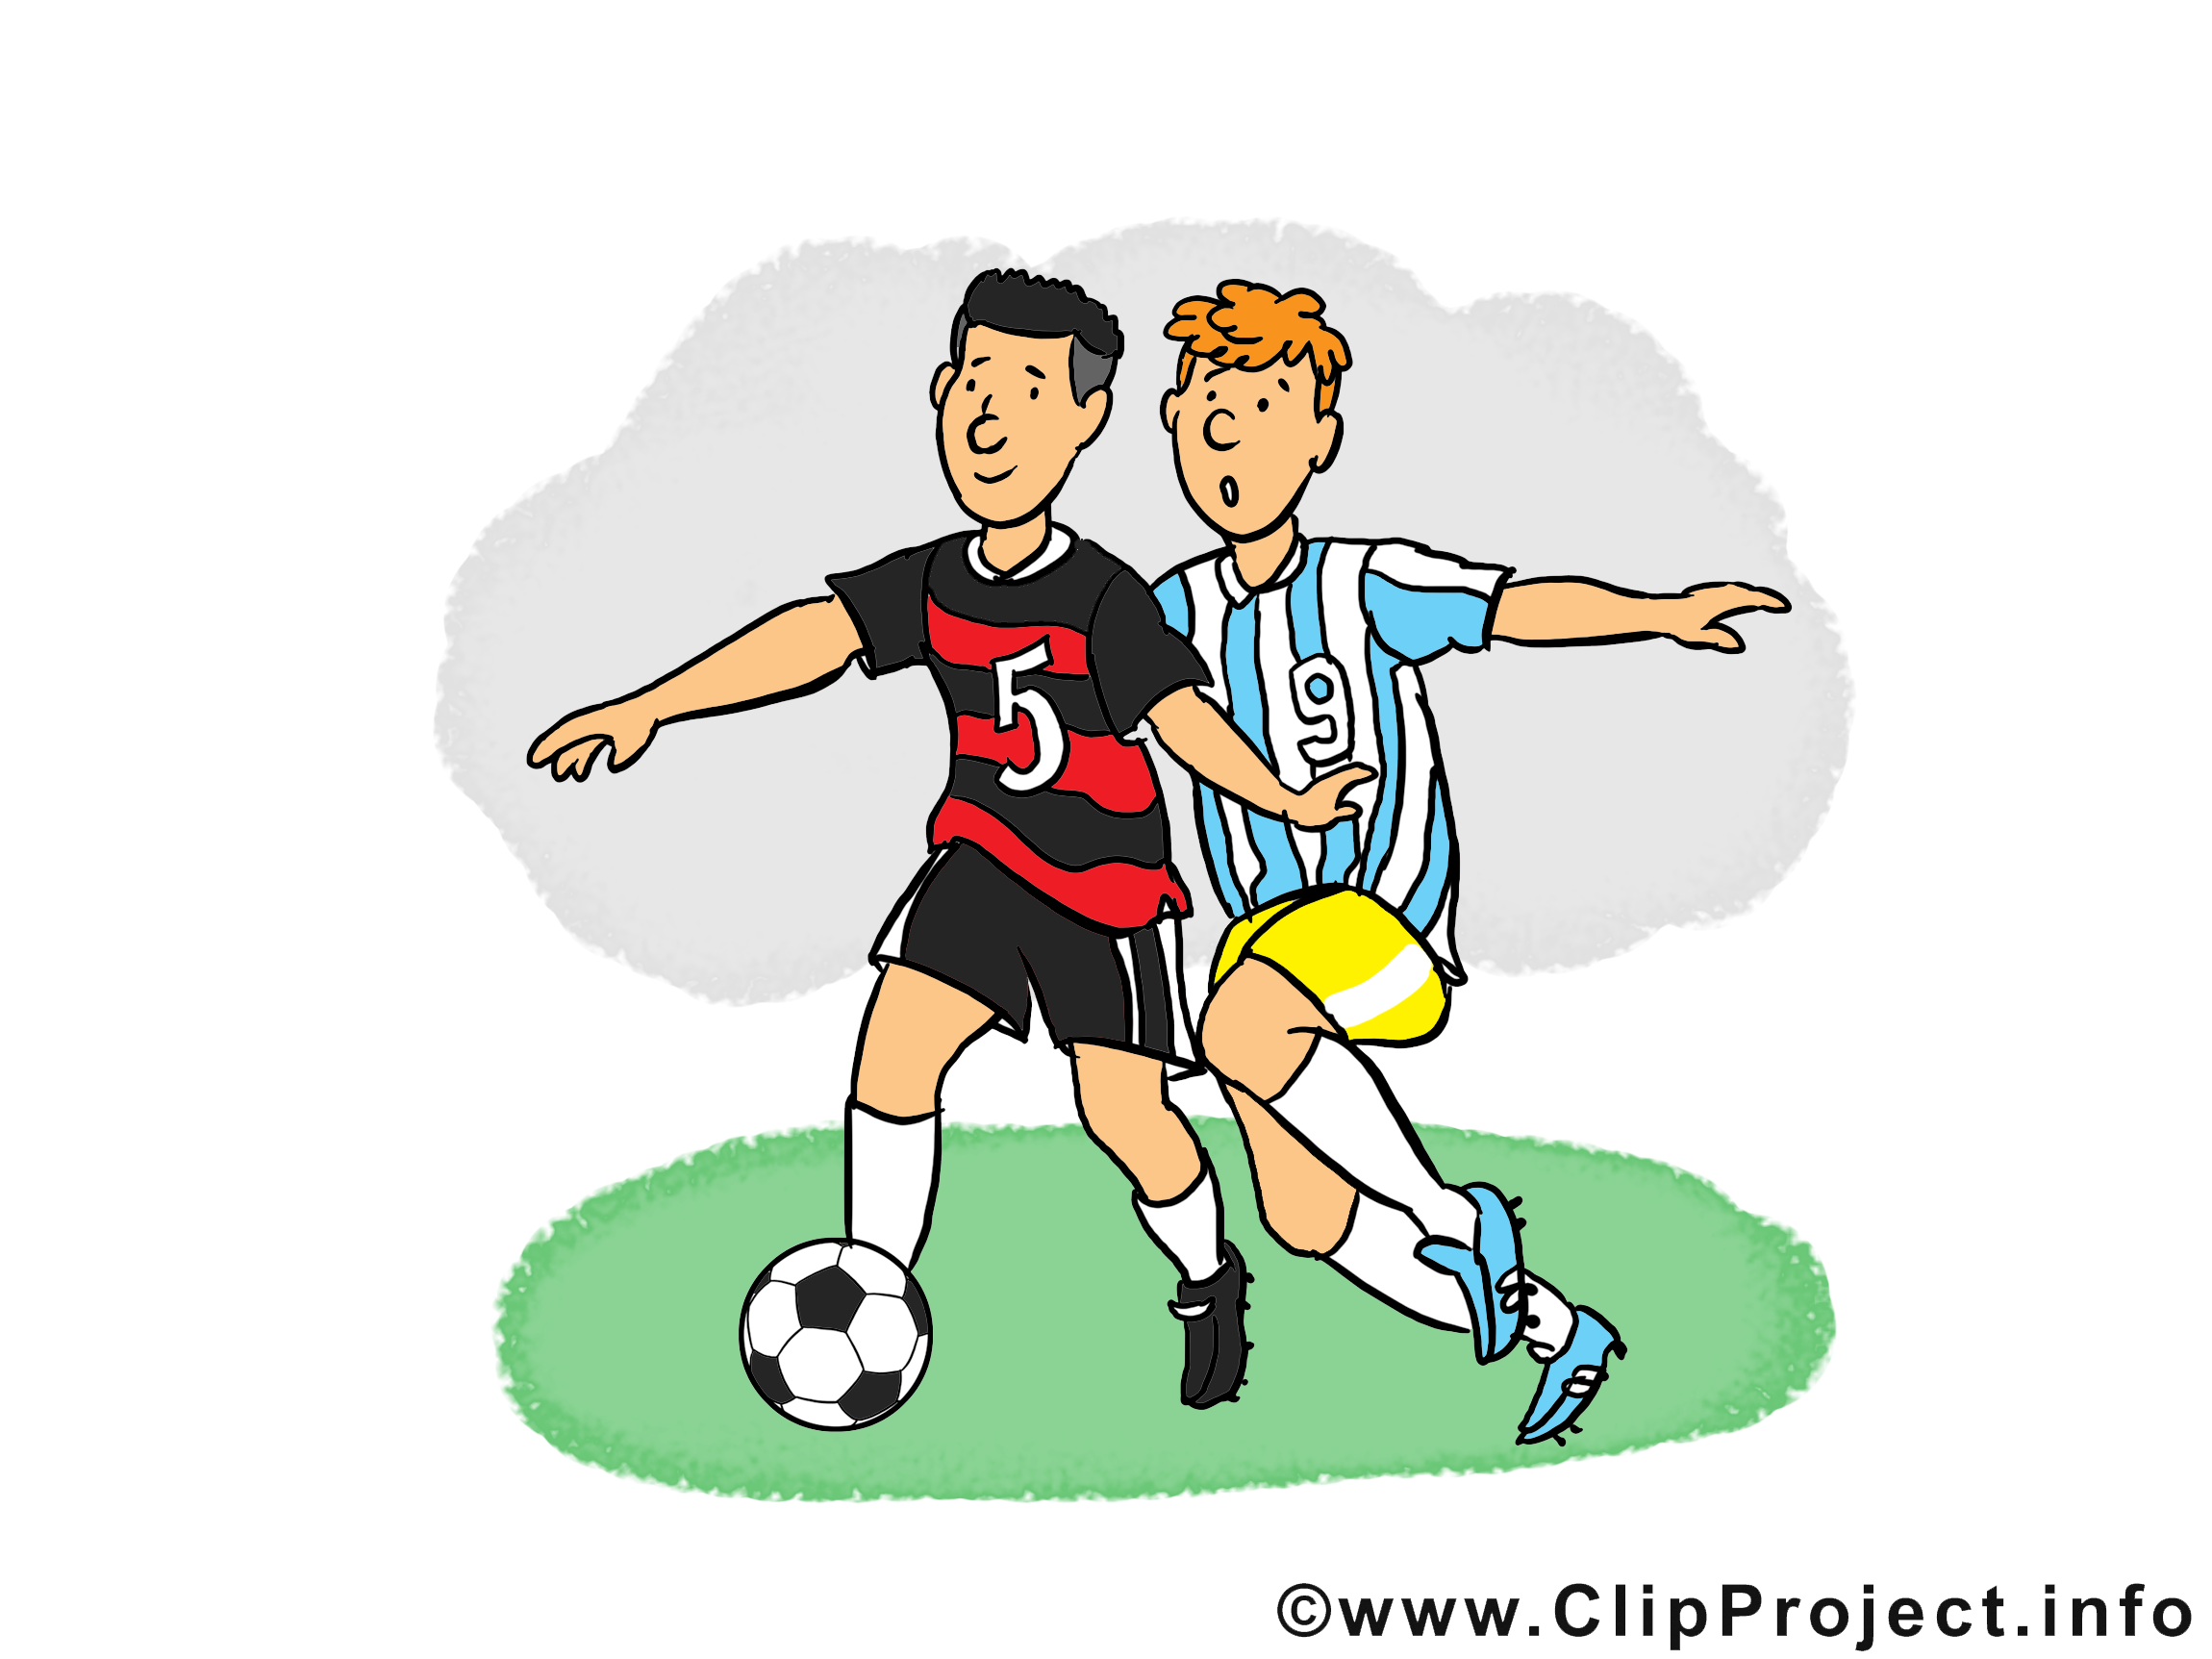 Violation image - Football images cliparts